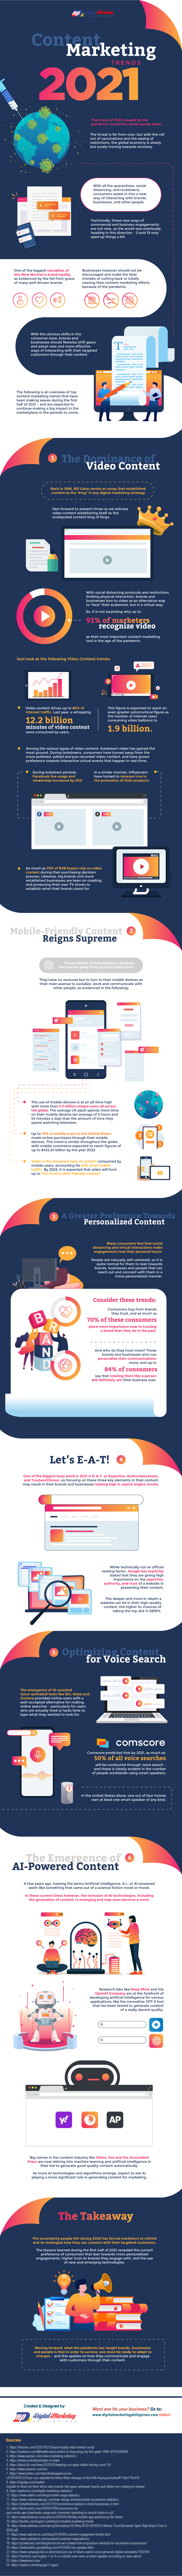 Content Marketing Trends 2021 – Mid-Year Report Infographic